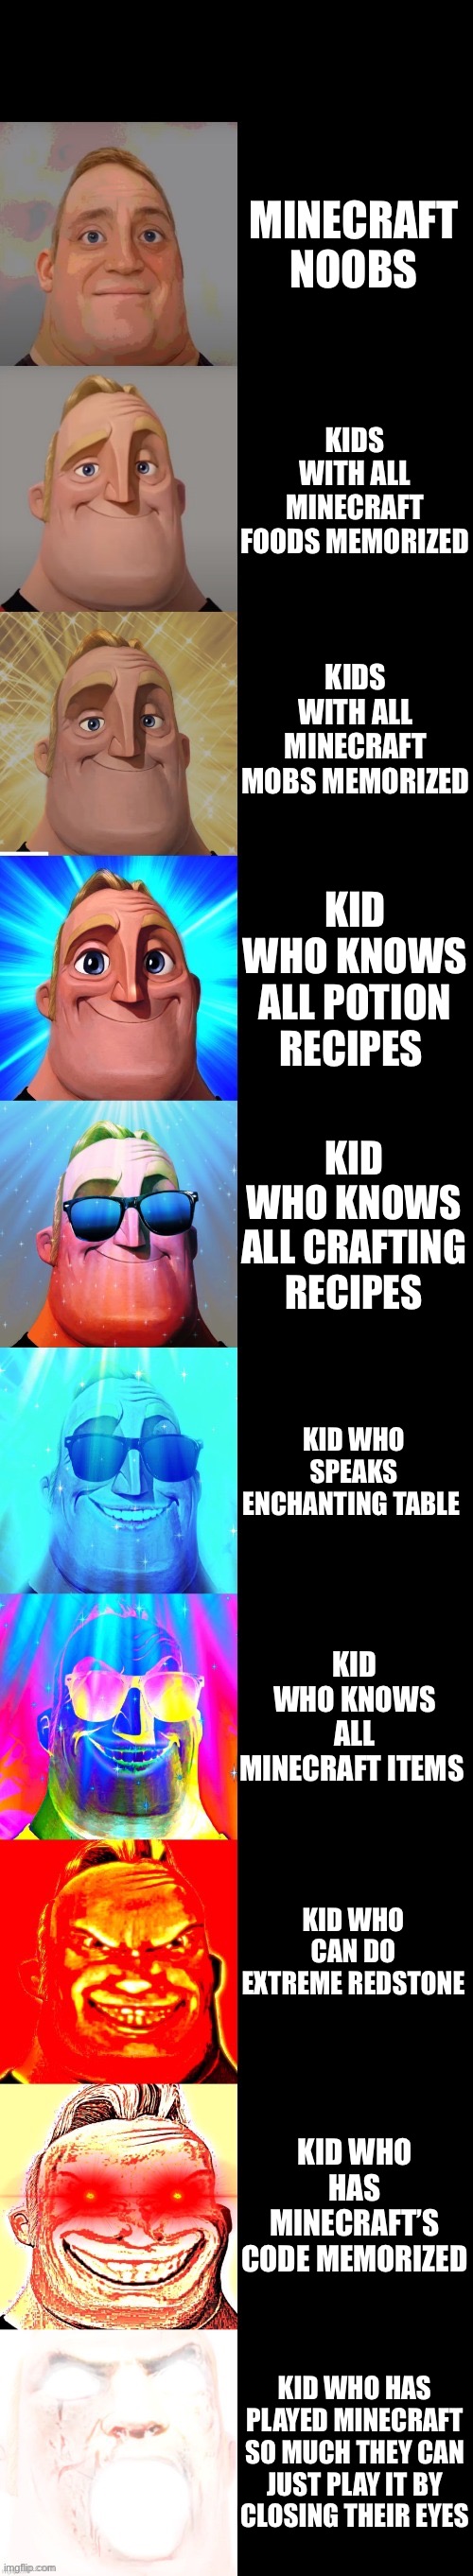 mr incredible becoming canny | MINECRAFT NOOBS; KIDS WITH ALL MINECRAFT FOODS MEMORIZED; KIDS WITH ALL MINECRAFT MOBS MEMORIZED; KID WHO KNOWS ALL POTION RECIPES; KID WHO KNOWS ALL CRAFTING RECIPES; KID WHO SPEAKS ENCHANTING TABLE; KID WHO KNOWS ALL MINECRAFT ITEMS; KID WHO CAN DO EXTREME REDSTONE; KID WHO HAS MINECRAFT’S CODE MEMORIZED; KID WHO HAS PLAYED MINECRAFT SO MUCH THEY CAN JUST PLAY IT BY CLOSING THEIR EYES | image tagged in mr incredible becoming canny,minecraft,recipe | made w/ Imgflip meme maker